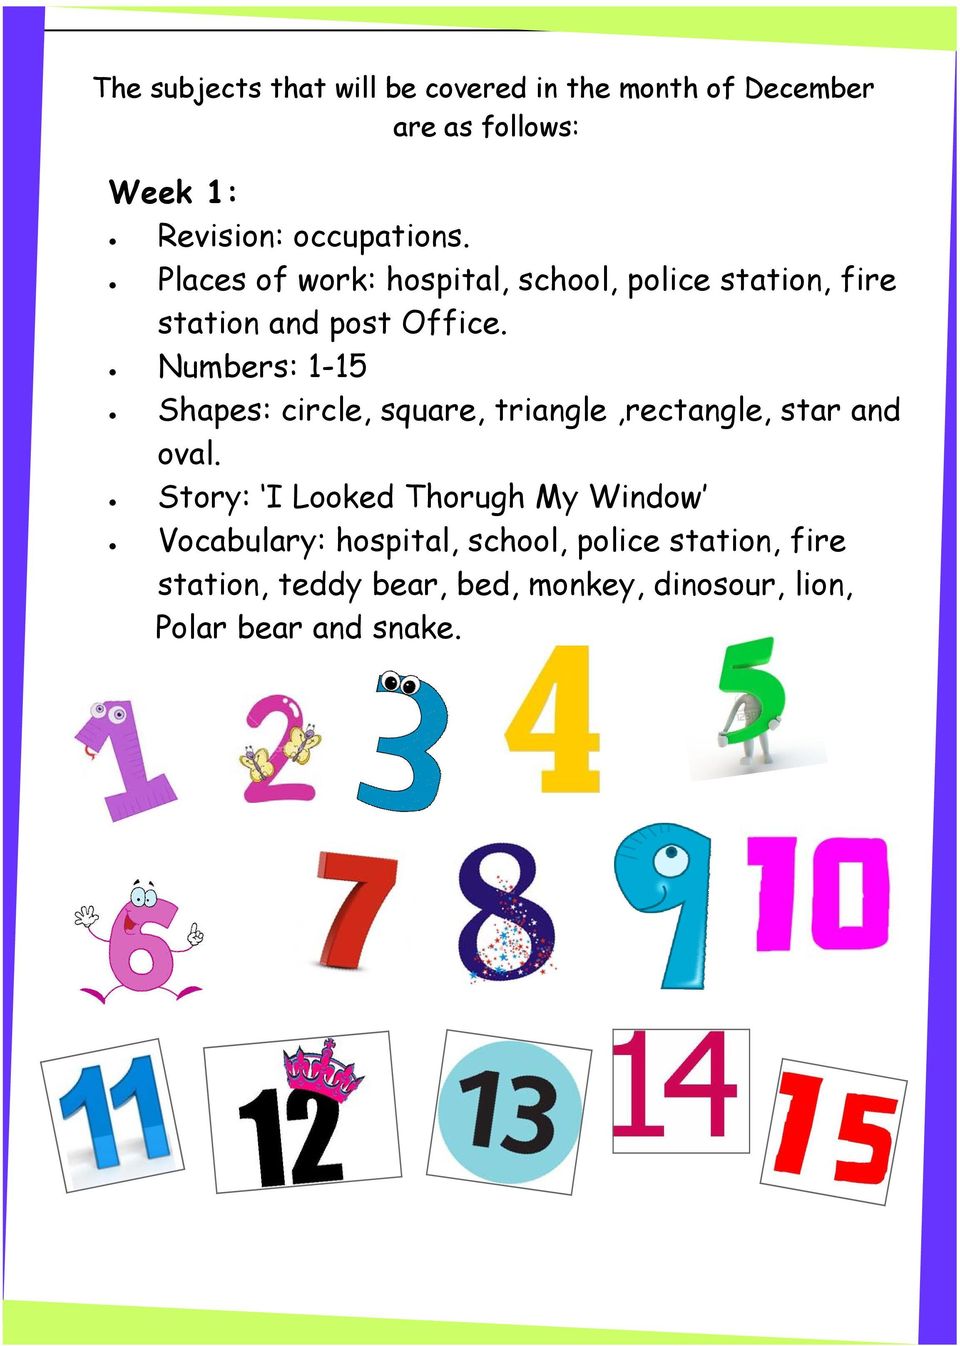 Numbers: 1-15 Shapes: circle, square, triangle,rectangle, star and oval.